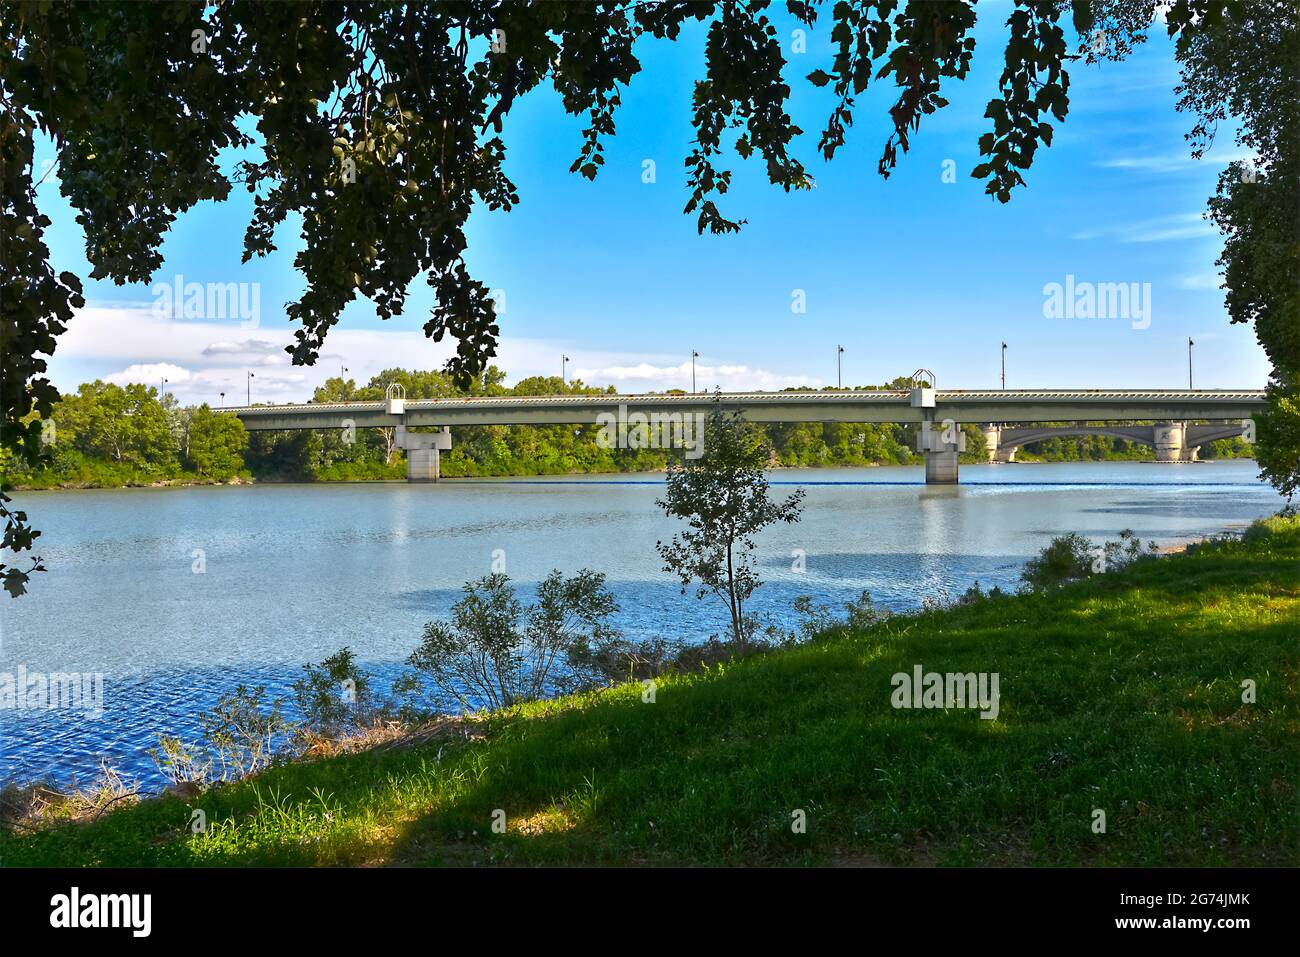 Bank of the Rhone and brige at Beaucaire, a commune in the Gard department in the Occitanie region of southern France Stock Photo